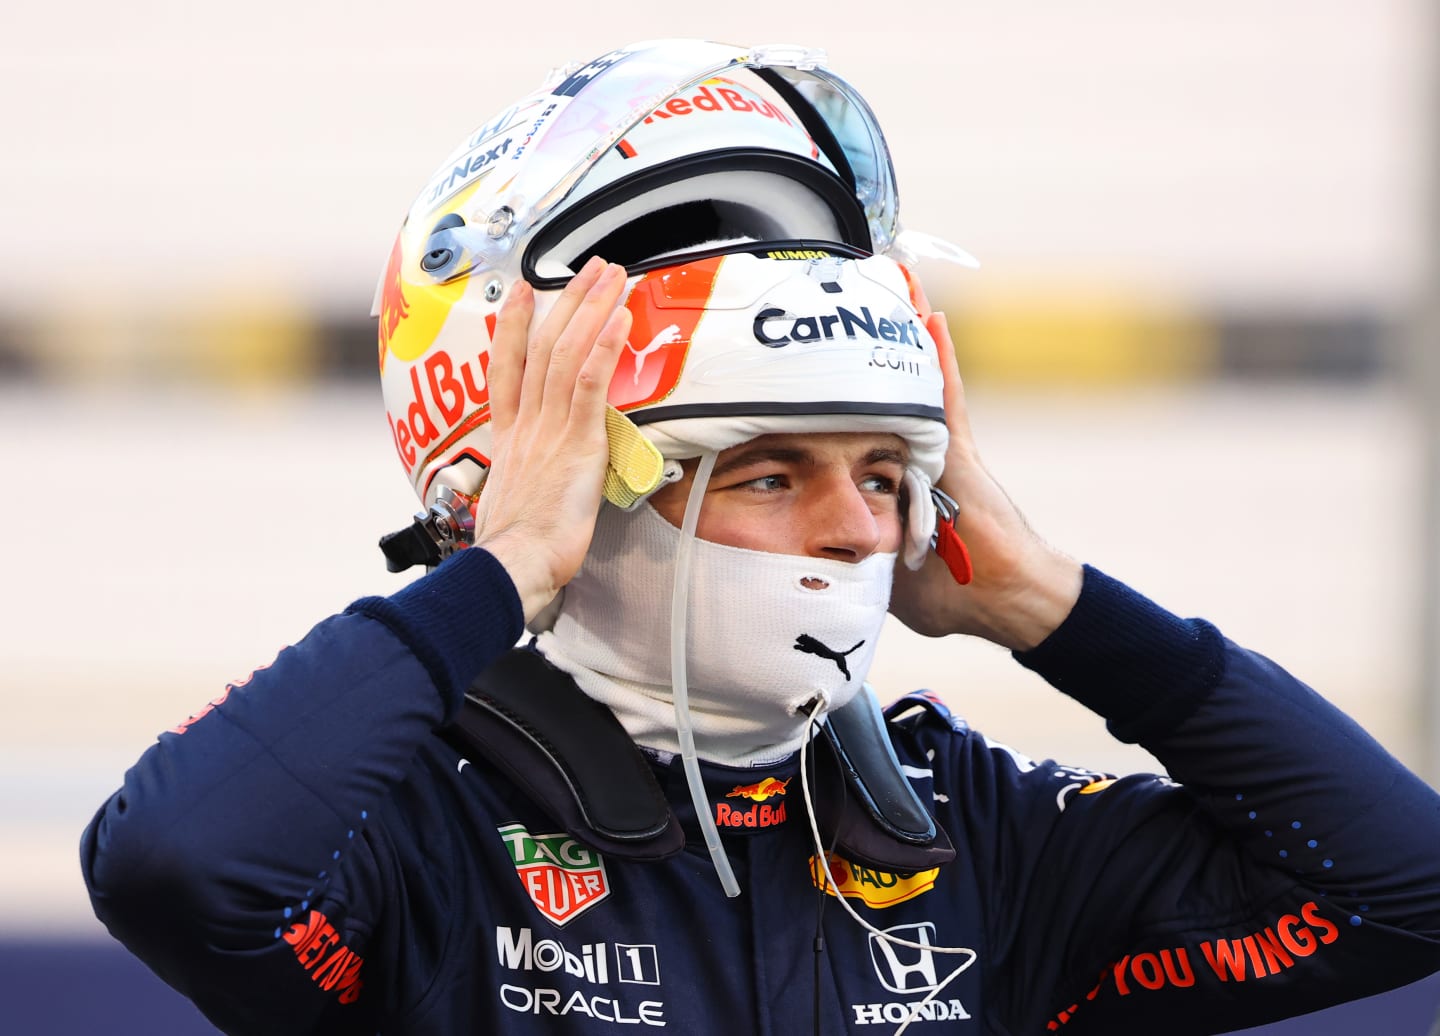 BAHRAIN, BAHRAIN - MARCH 28: Max Verstappen of Netherlands and Red Bull Racing puts his helmet on